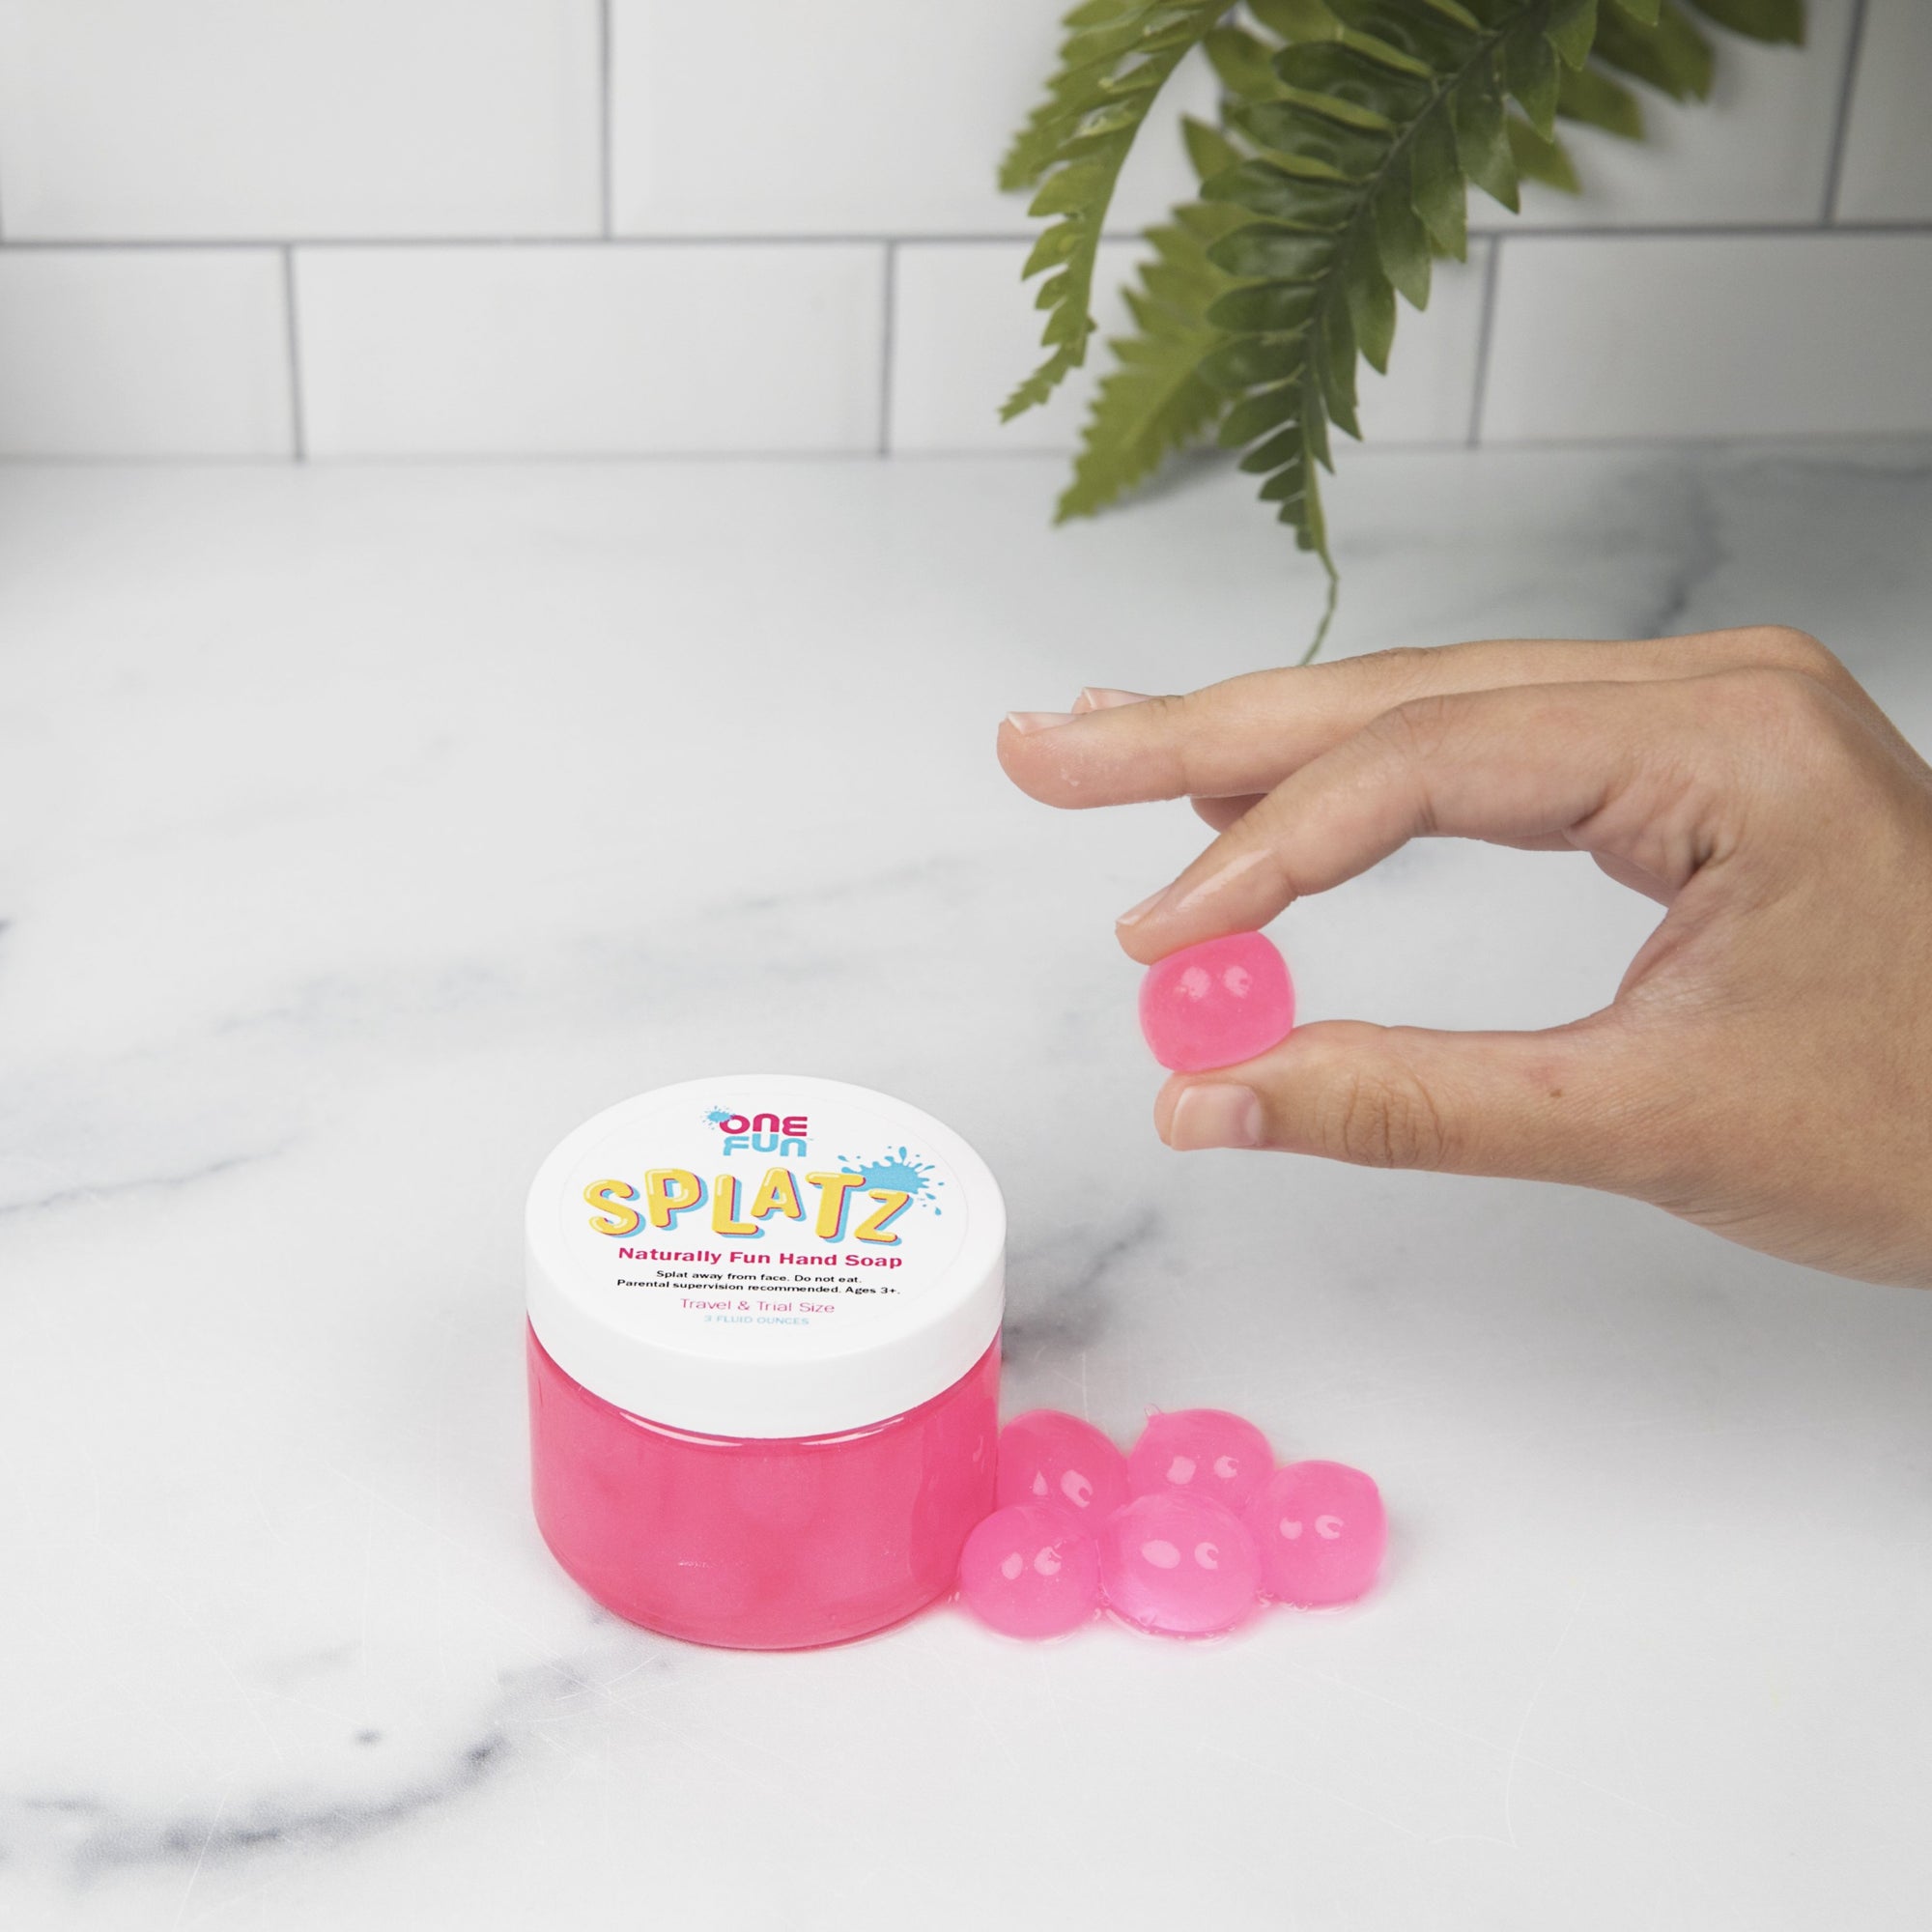  Fun Kids Hand Soap Pink - Natural Bursting Bubbles with Fresh  Floral Scent - Irresistible Balls of Soap That SPLAT for Perfect Amount of  Soap Every Time - by SPLATZ